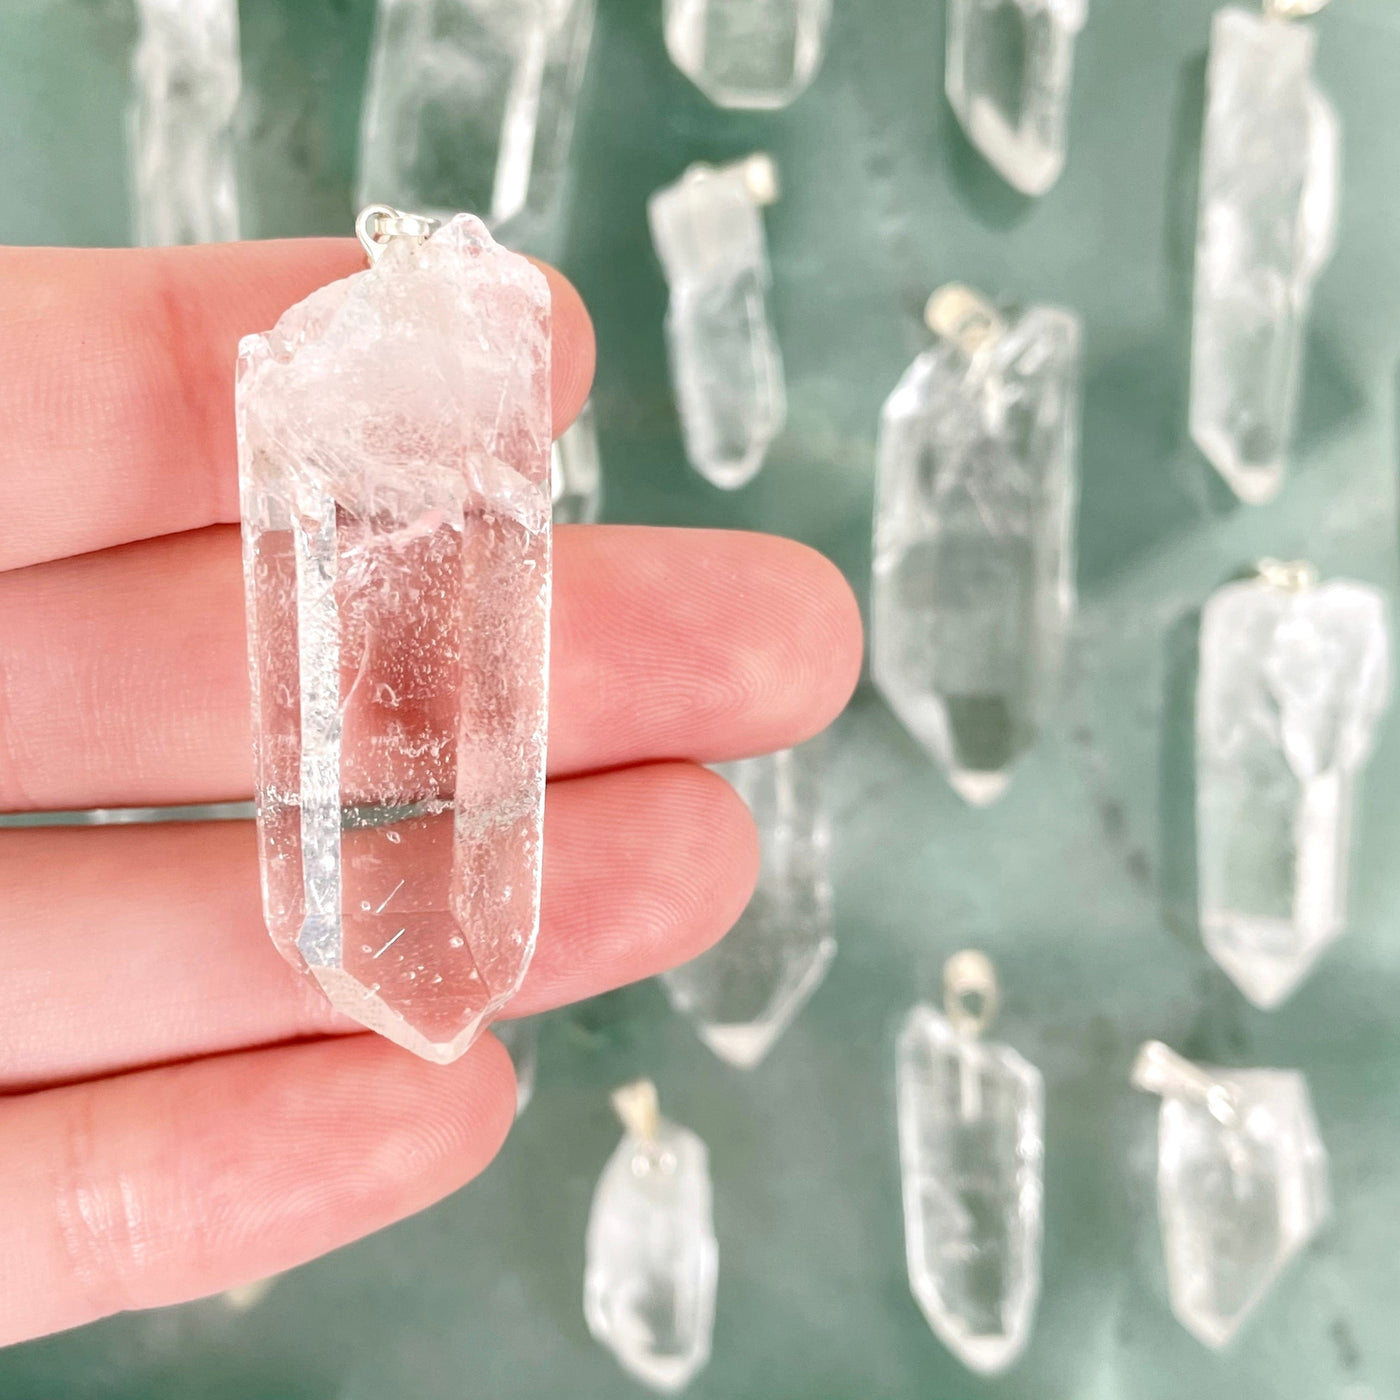 close up of crystal quartz rough point pendant in hand for size reference with others in background